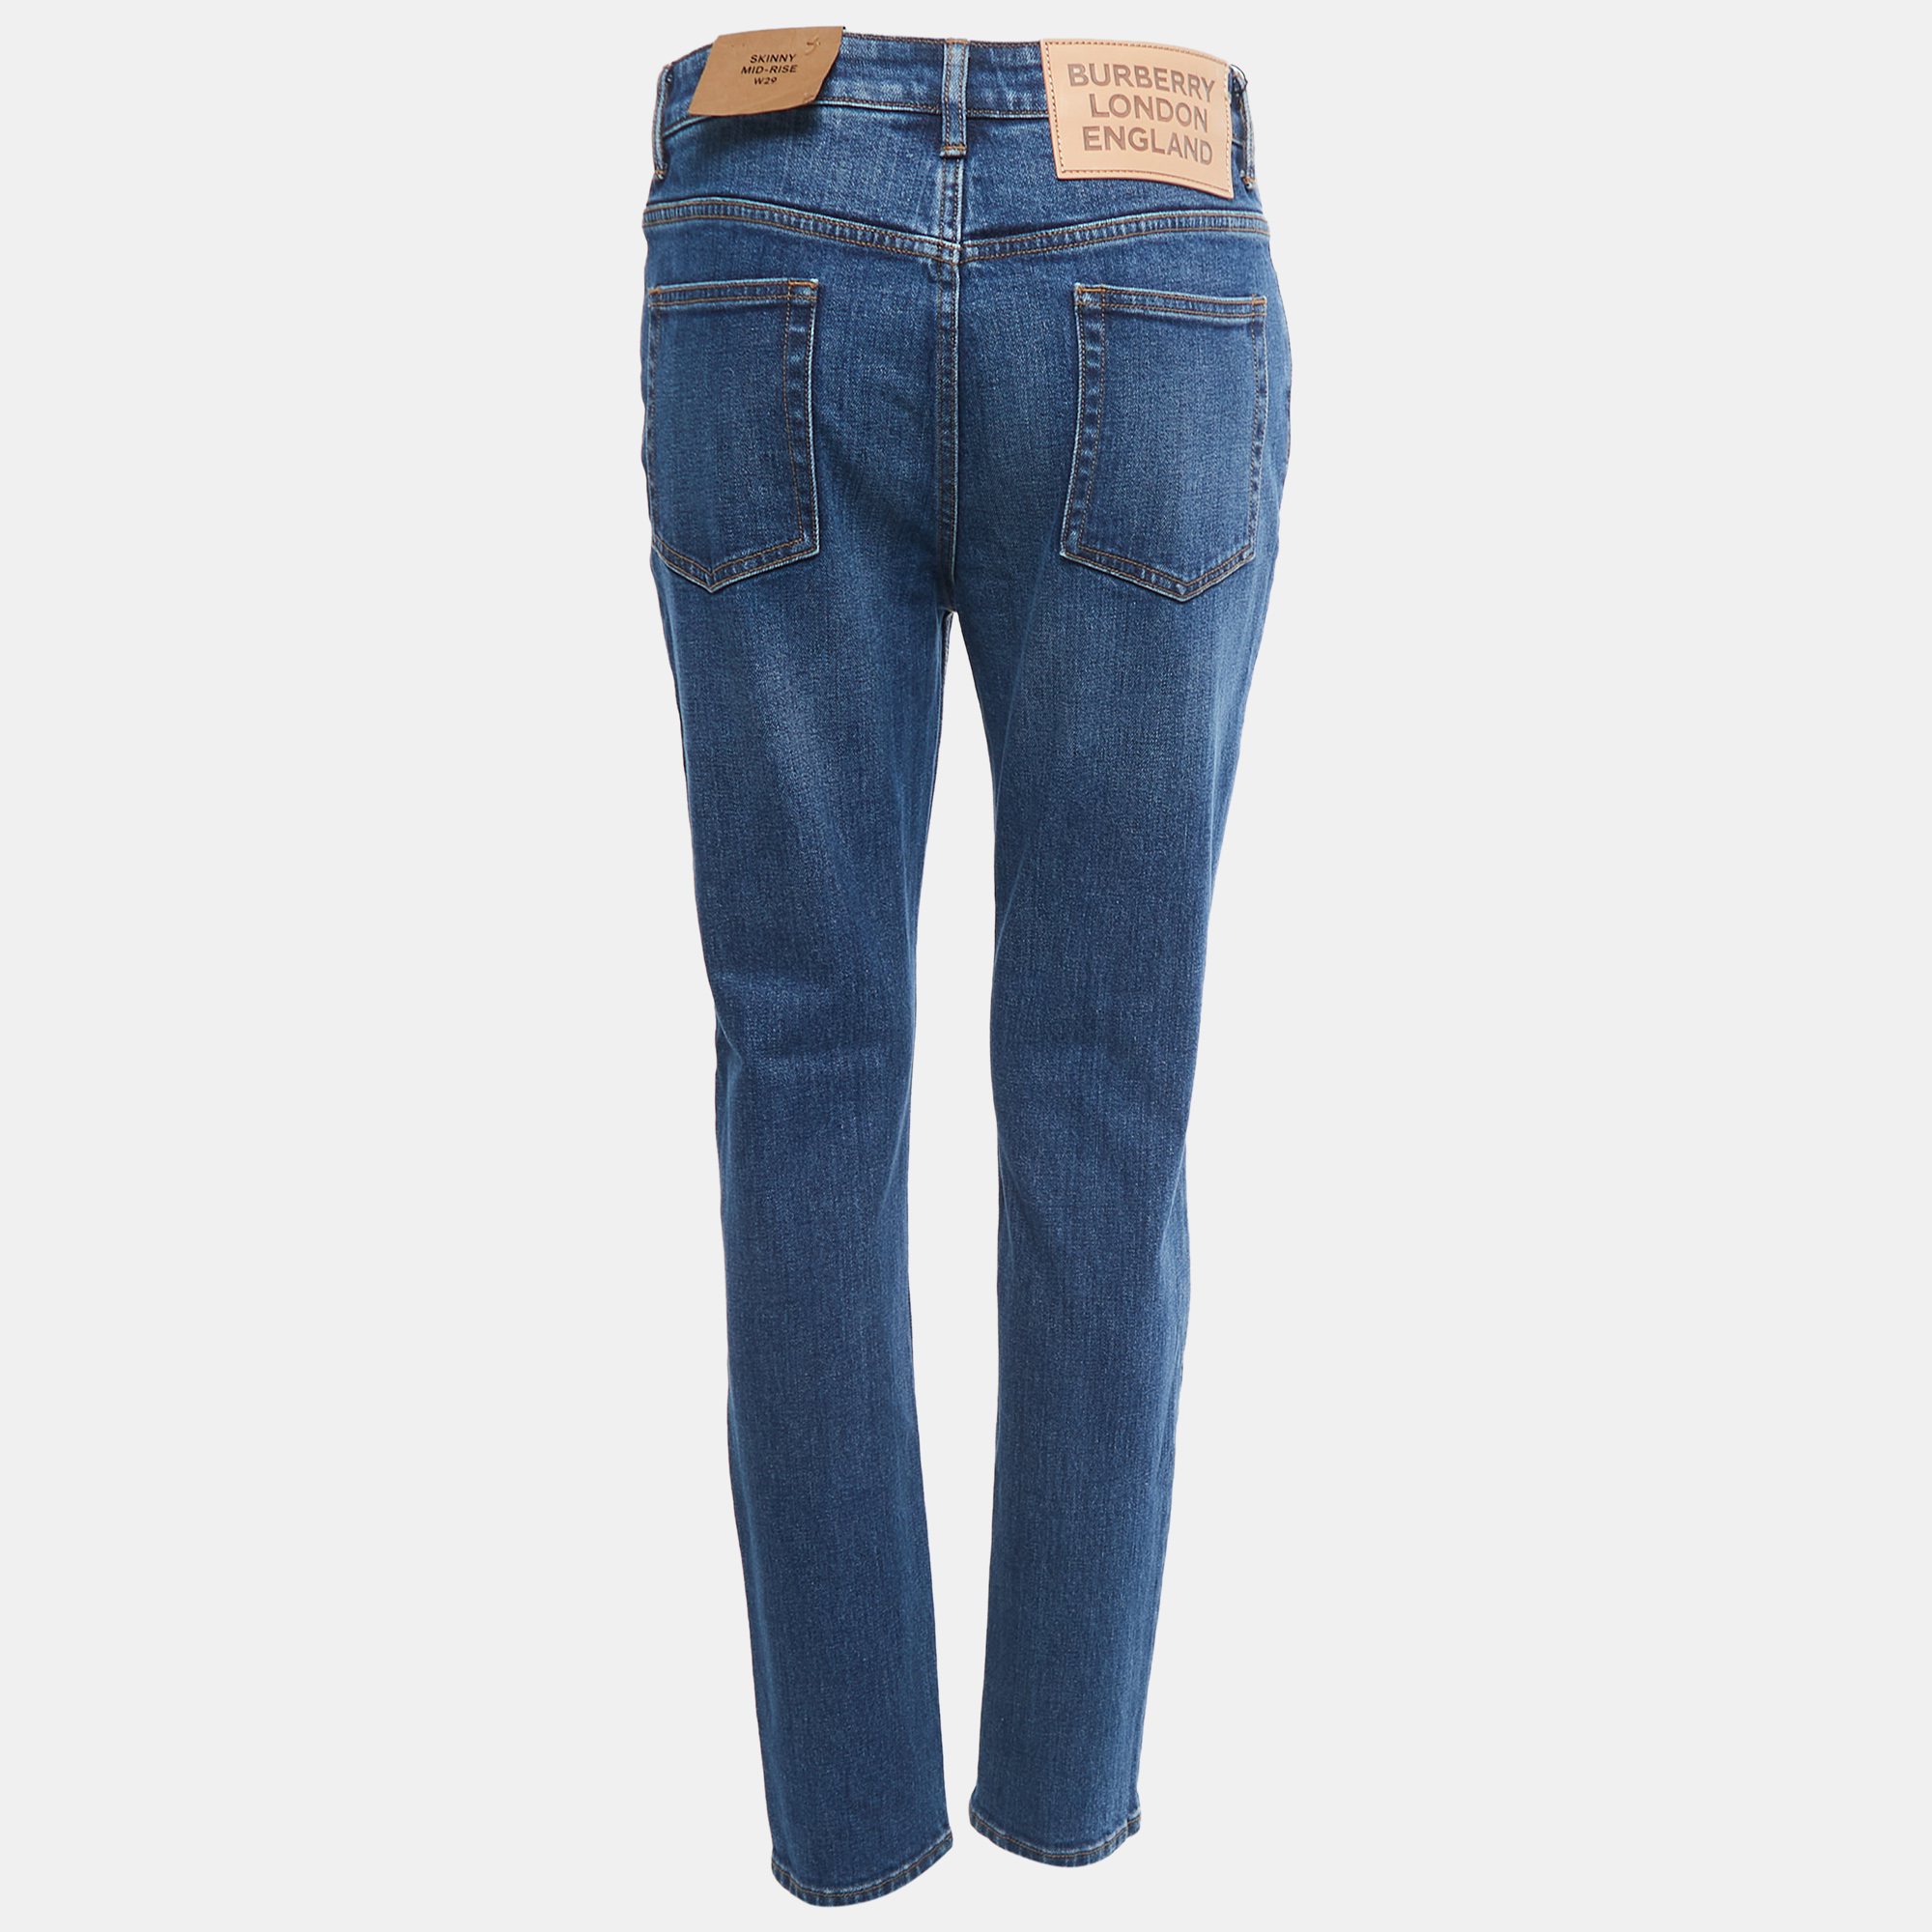 

Burberry Blue Washed Denim Skinny Mid-Rise Jeans  Waist 30